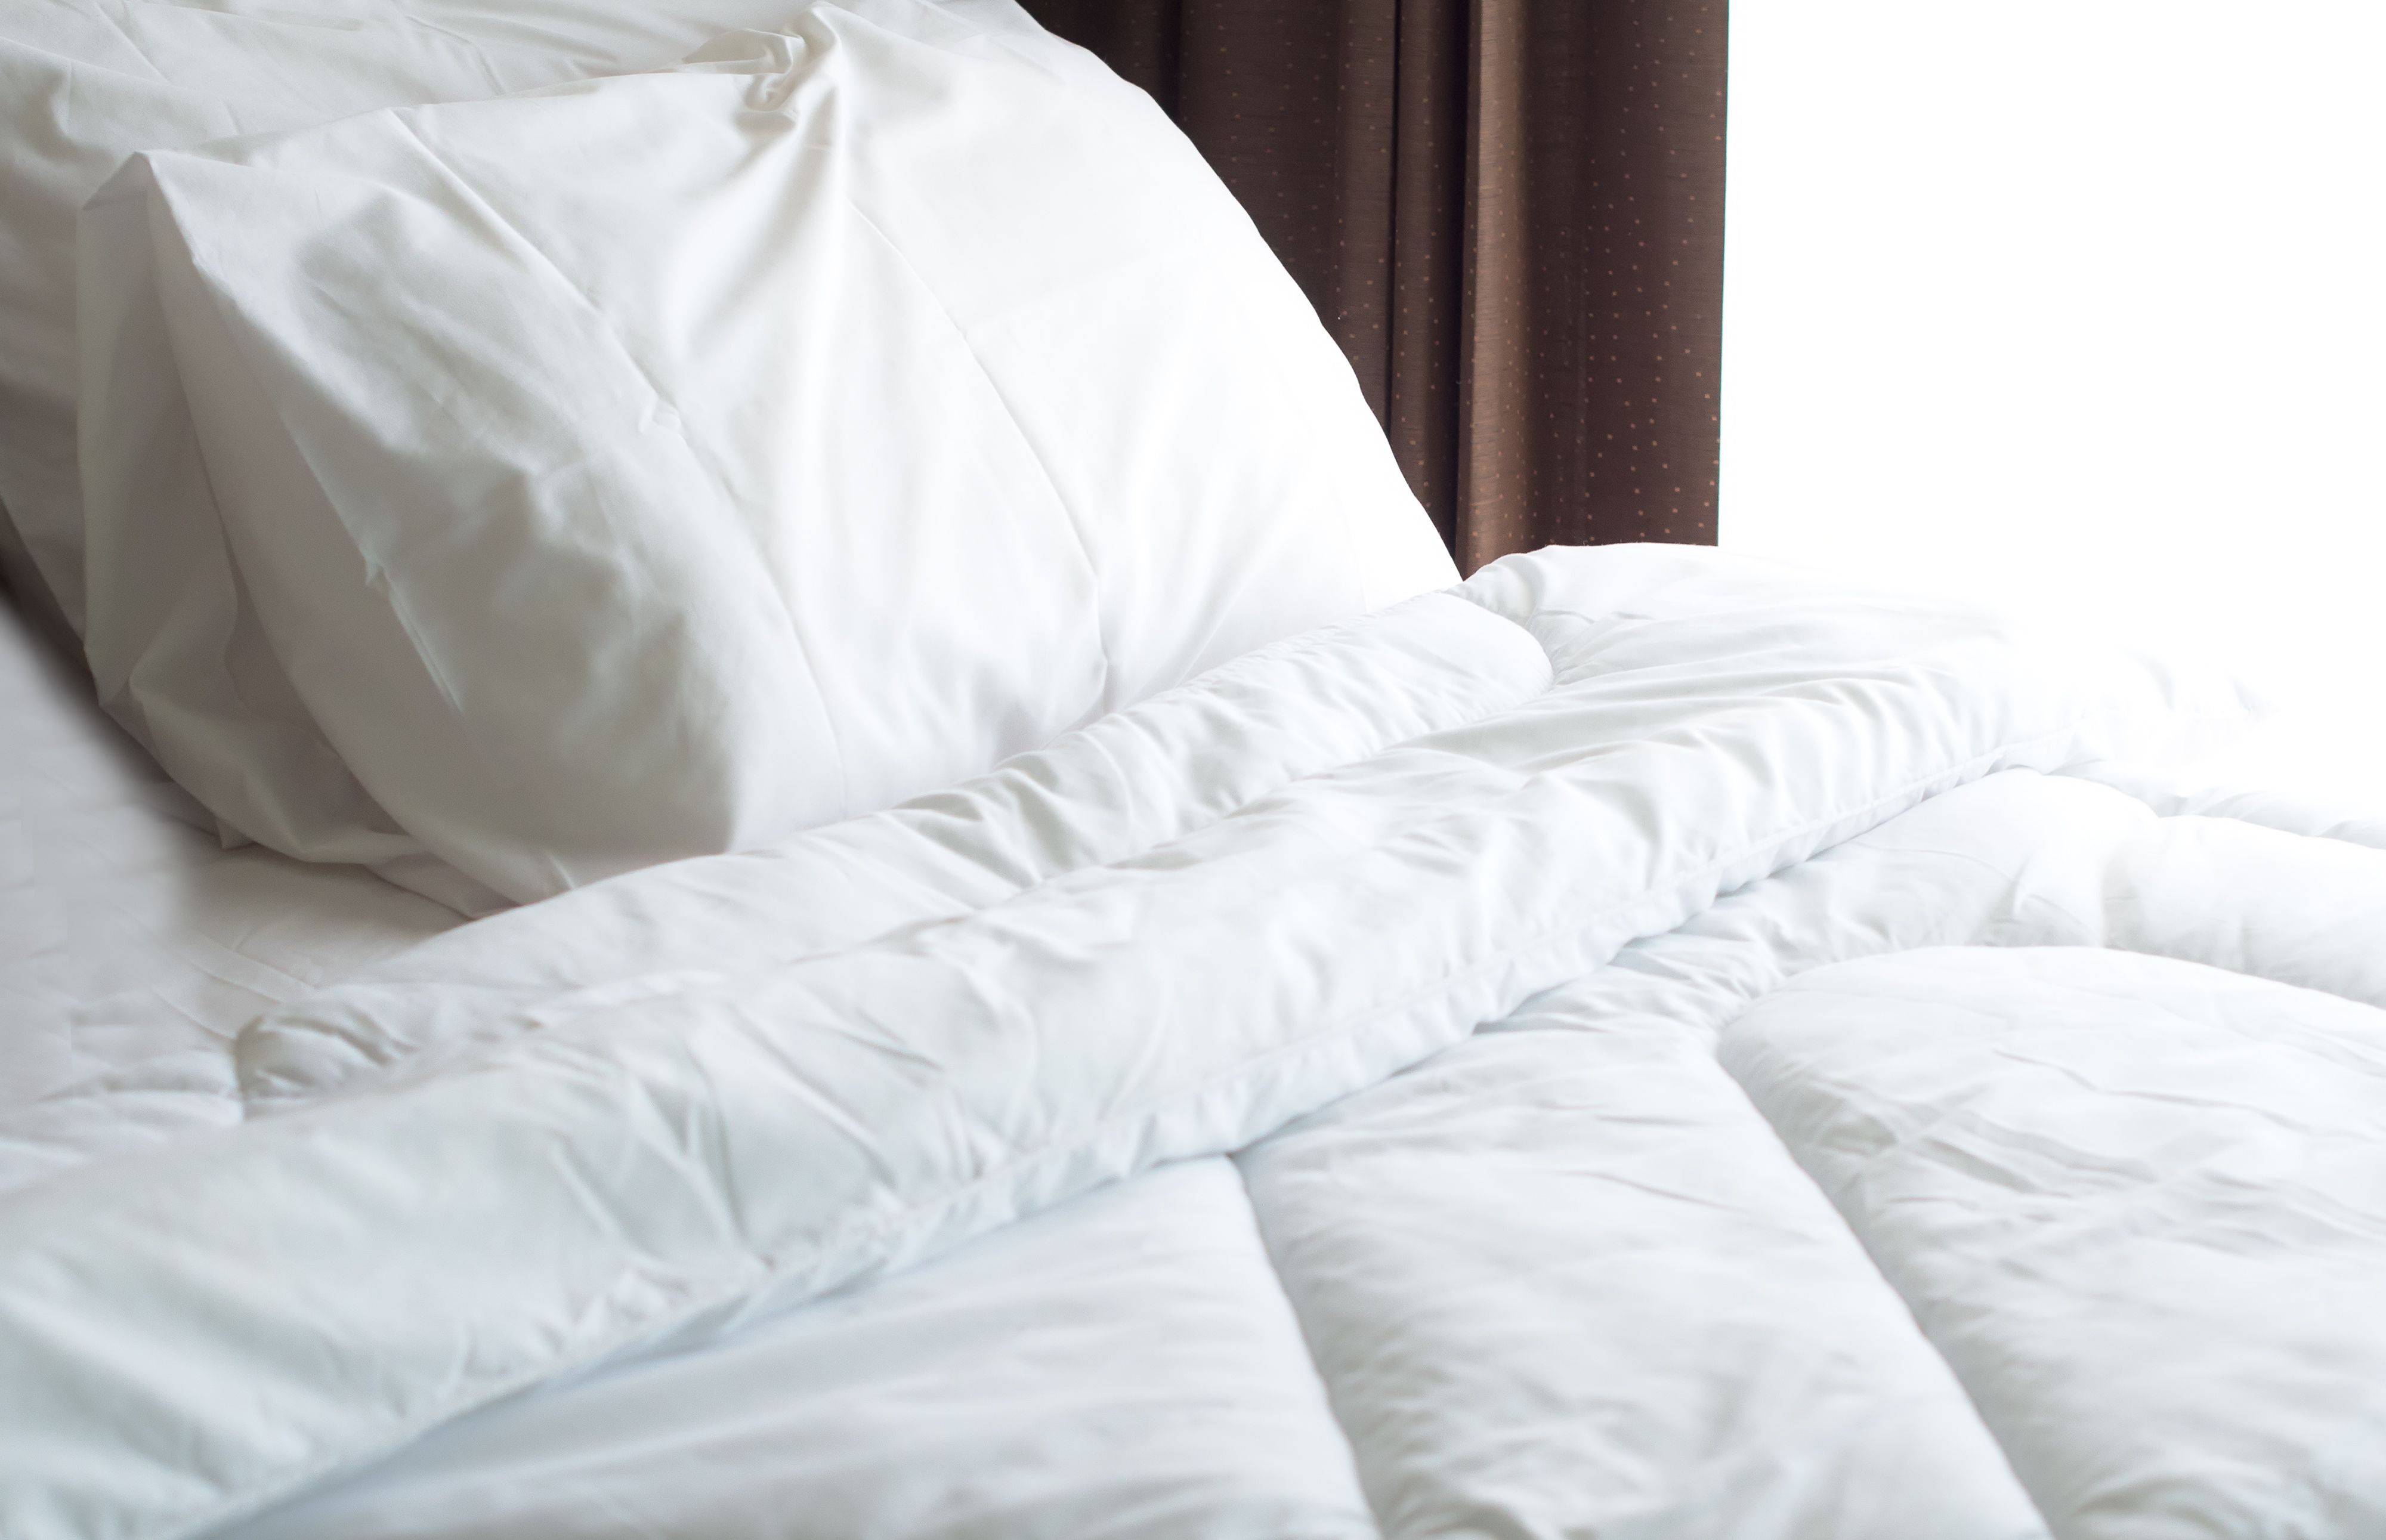 Comforter Buying Guide How To Buy A Comforter